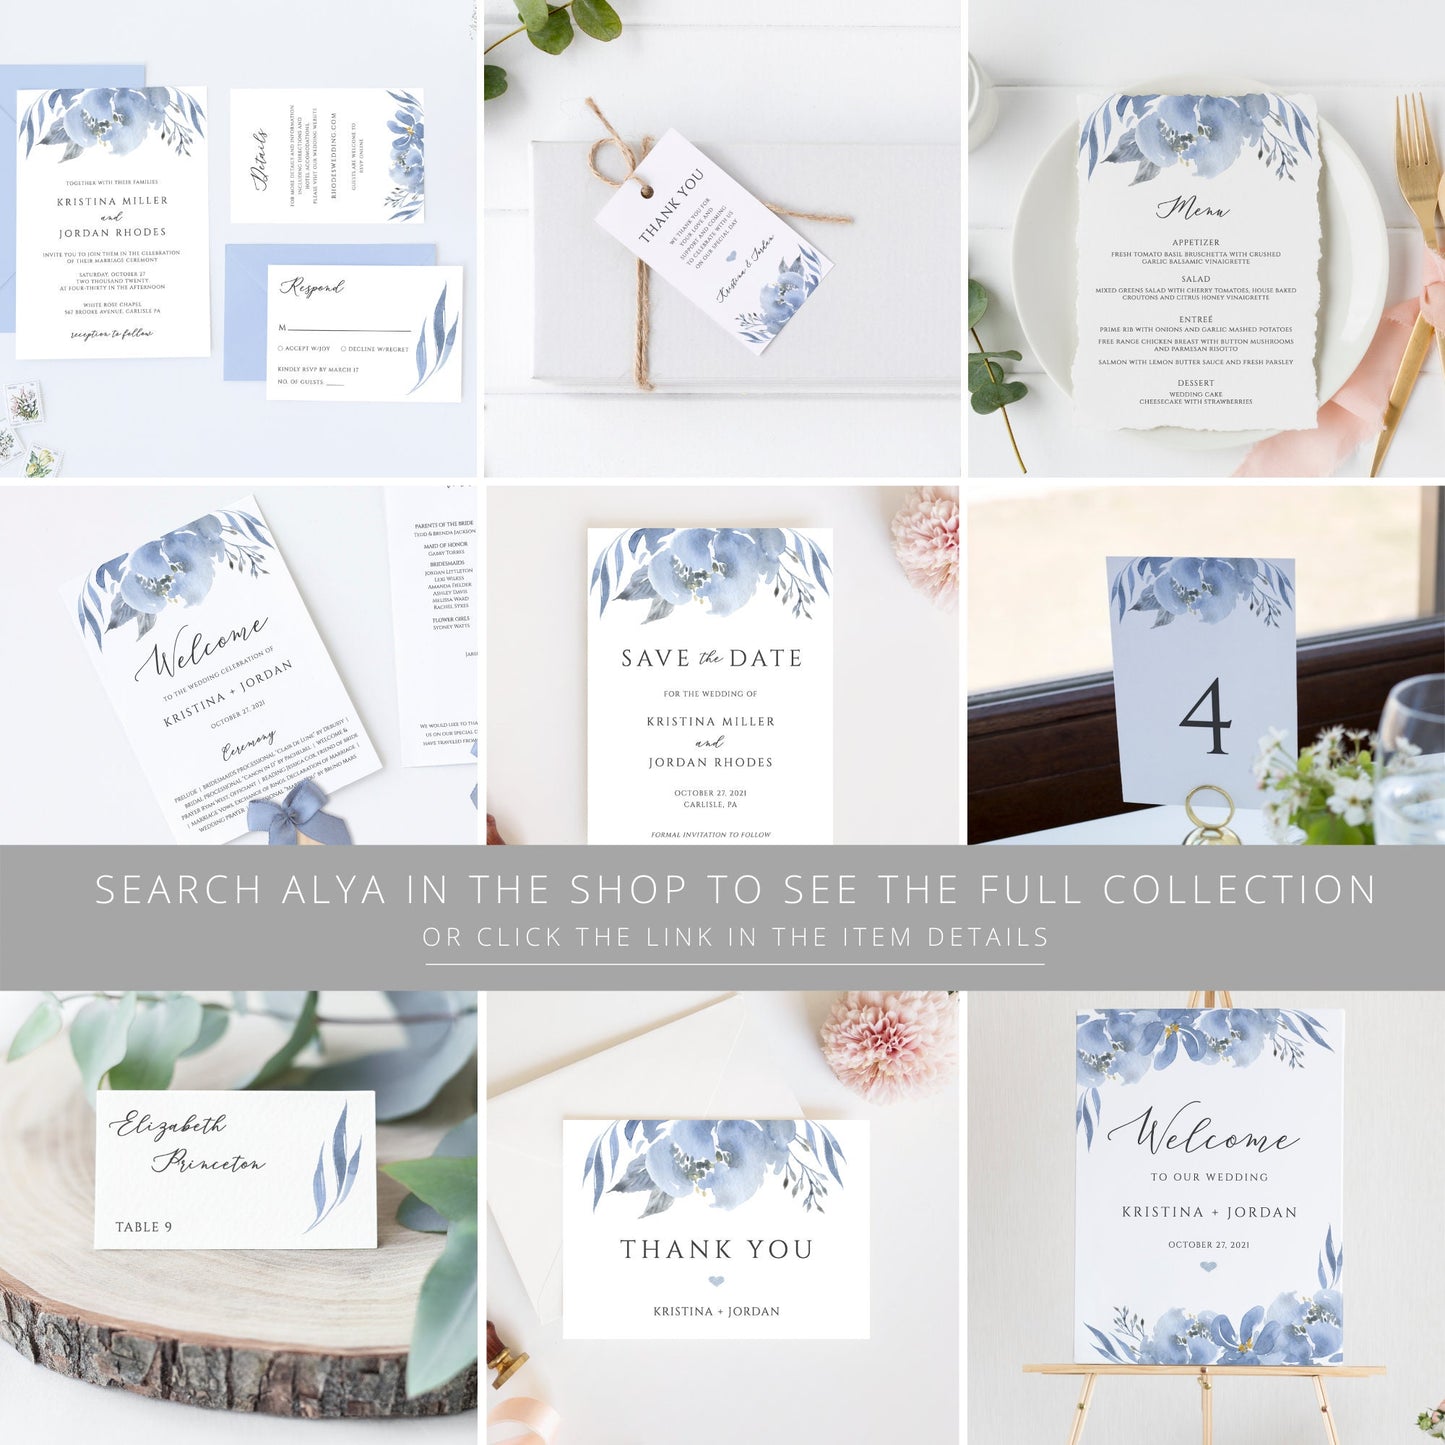 Editable Custom Wedding Sign Dusty Blue Floral Wedding Sign Kit Create Unlimited Signs 8x10 and 10x8 Template